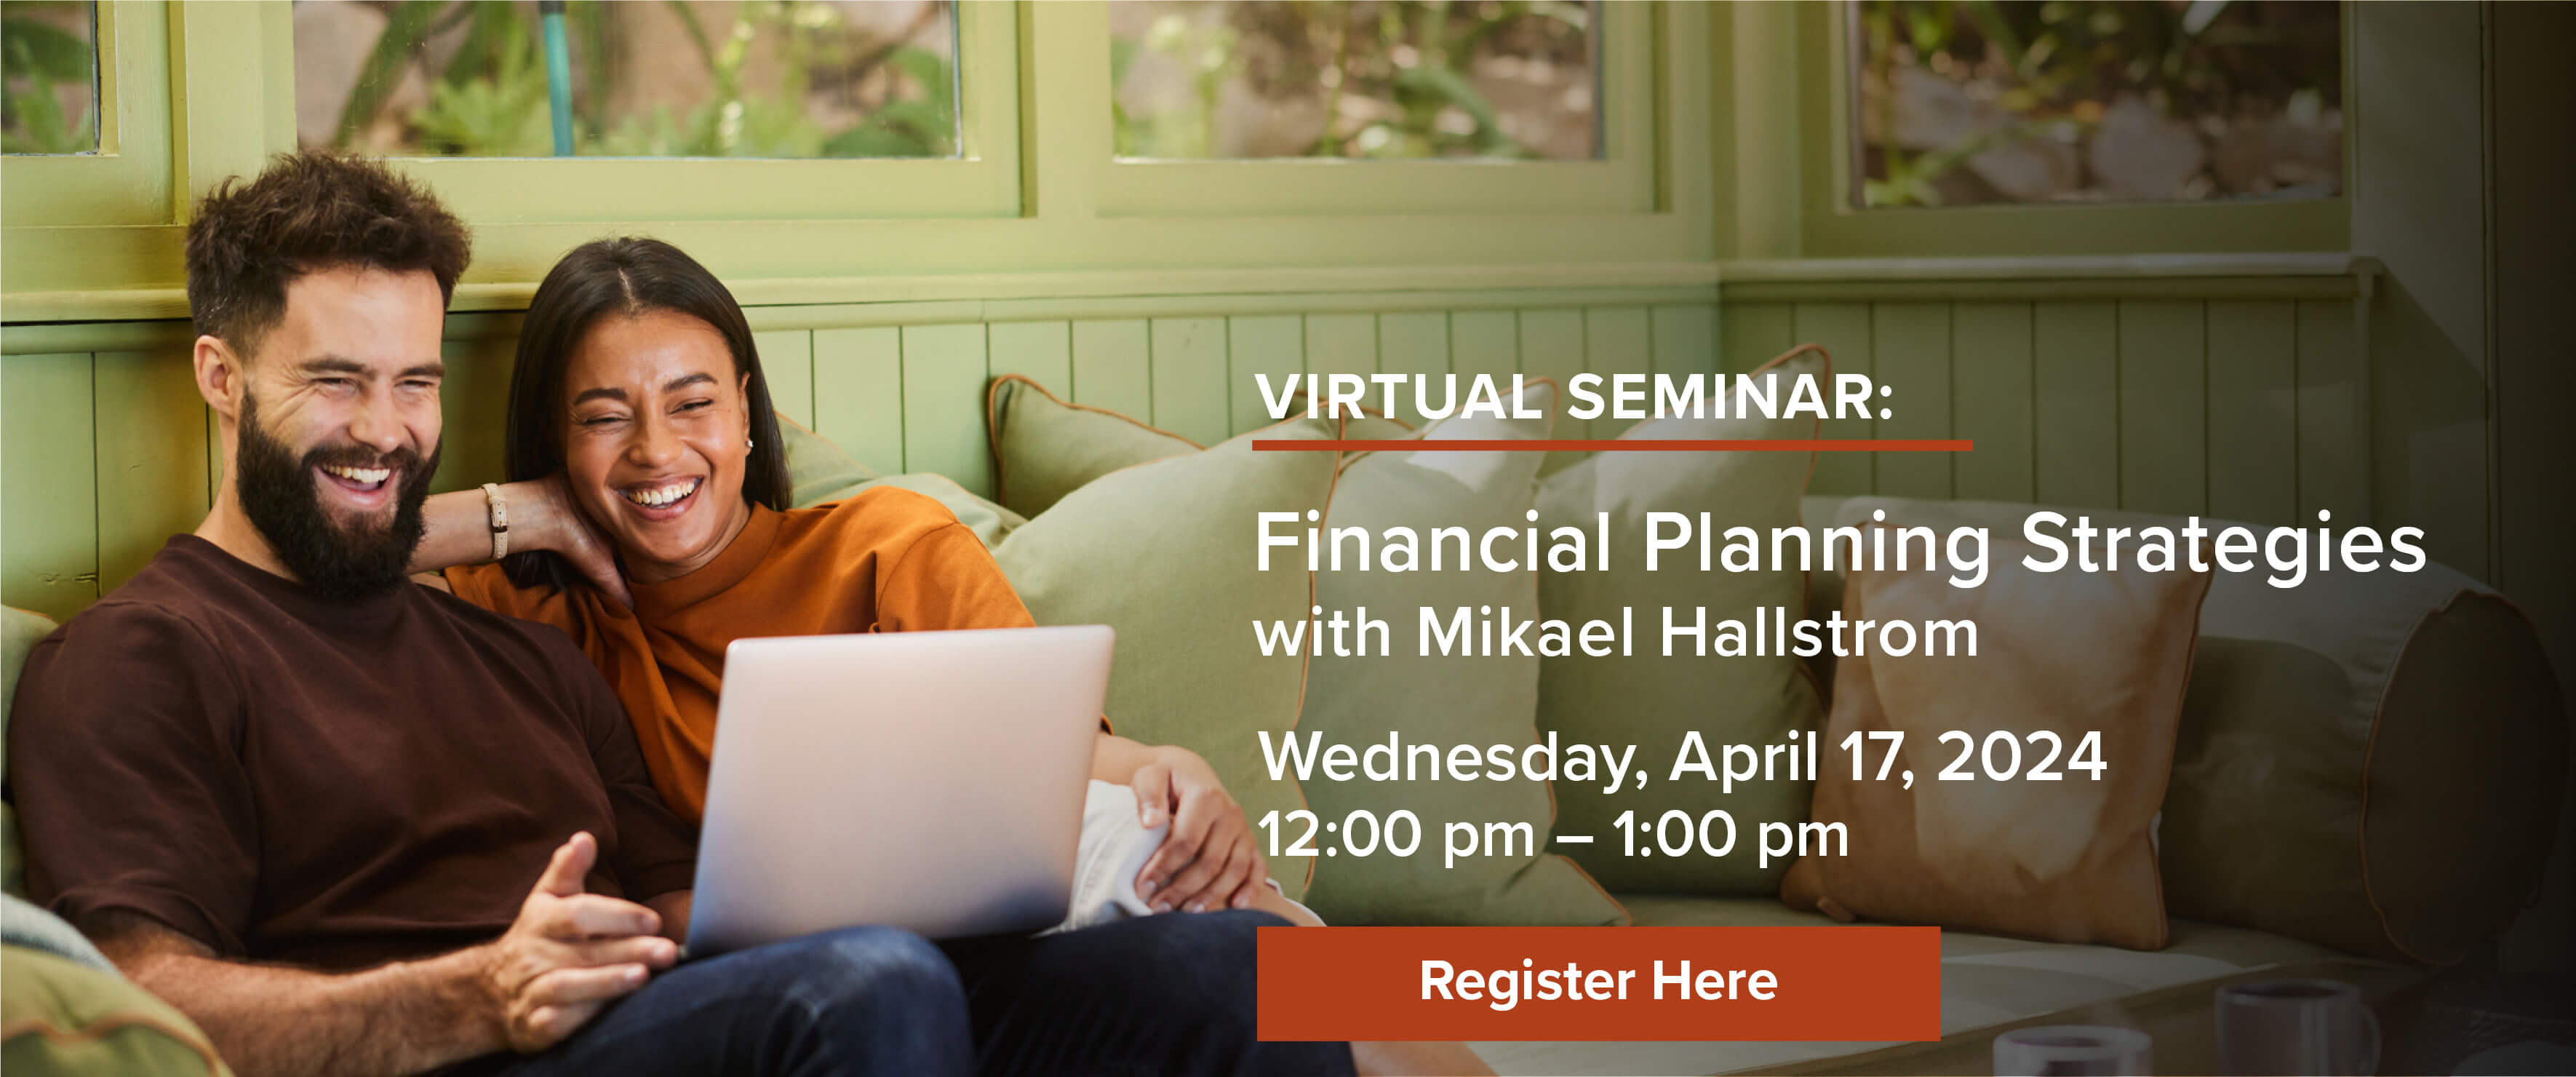 Virtual Seminar Financial Planning Strategies with Mikael Hallstrom Wednesday, April 17, 2024 12-1pm ET